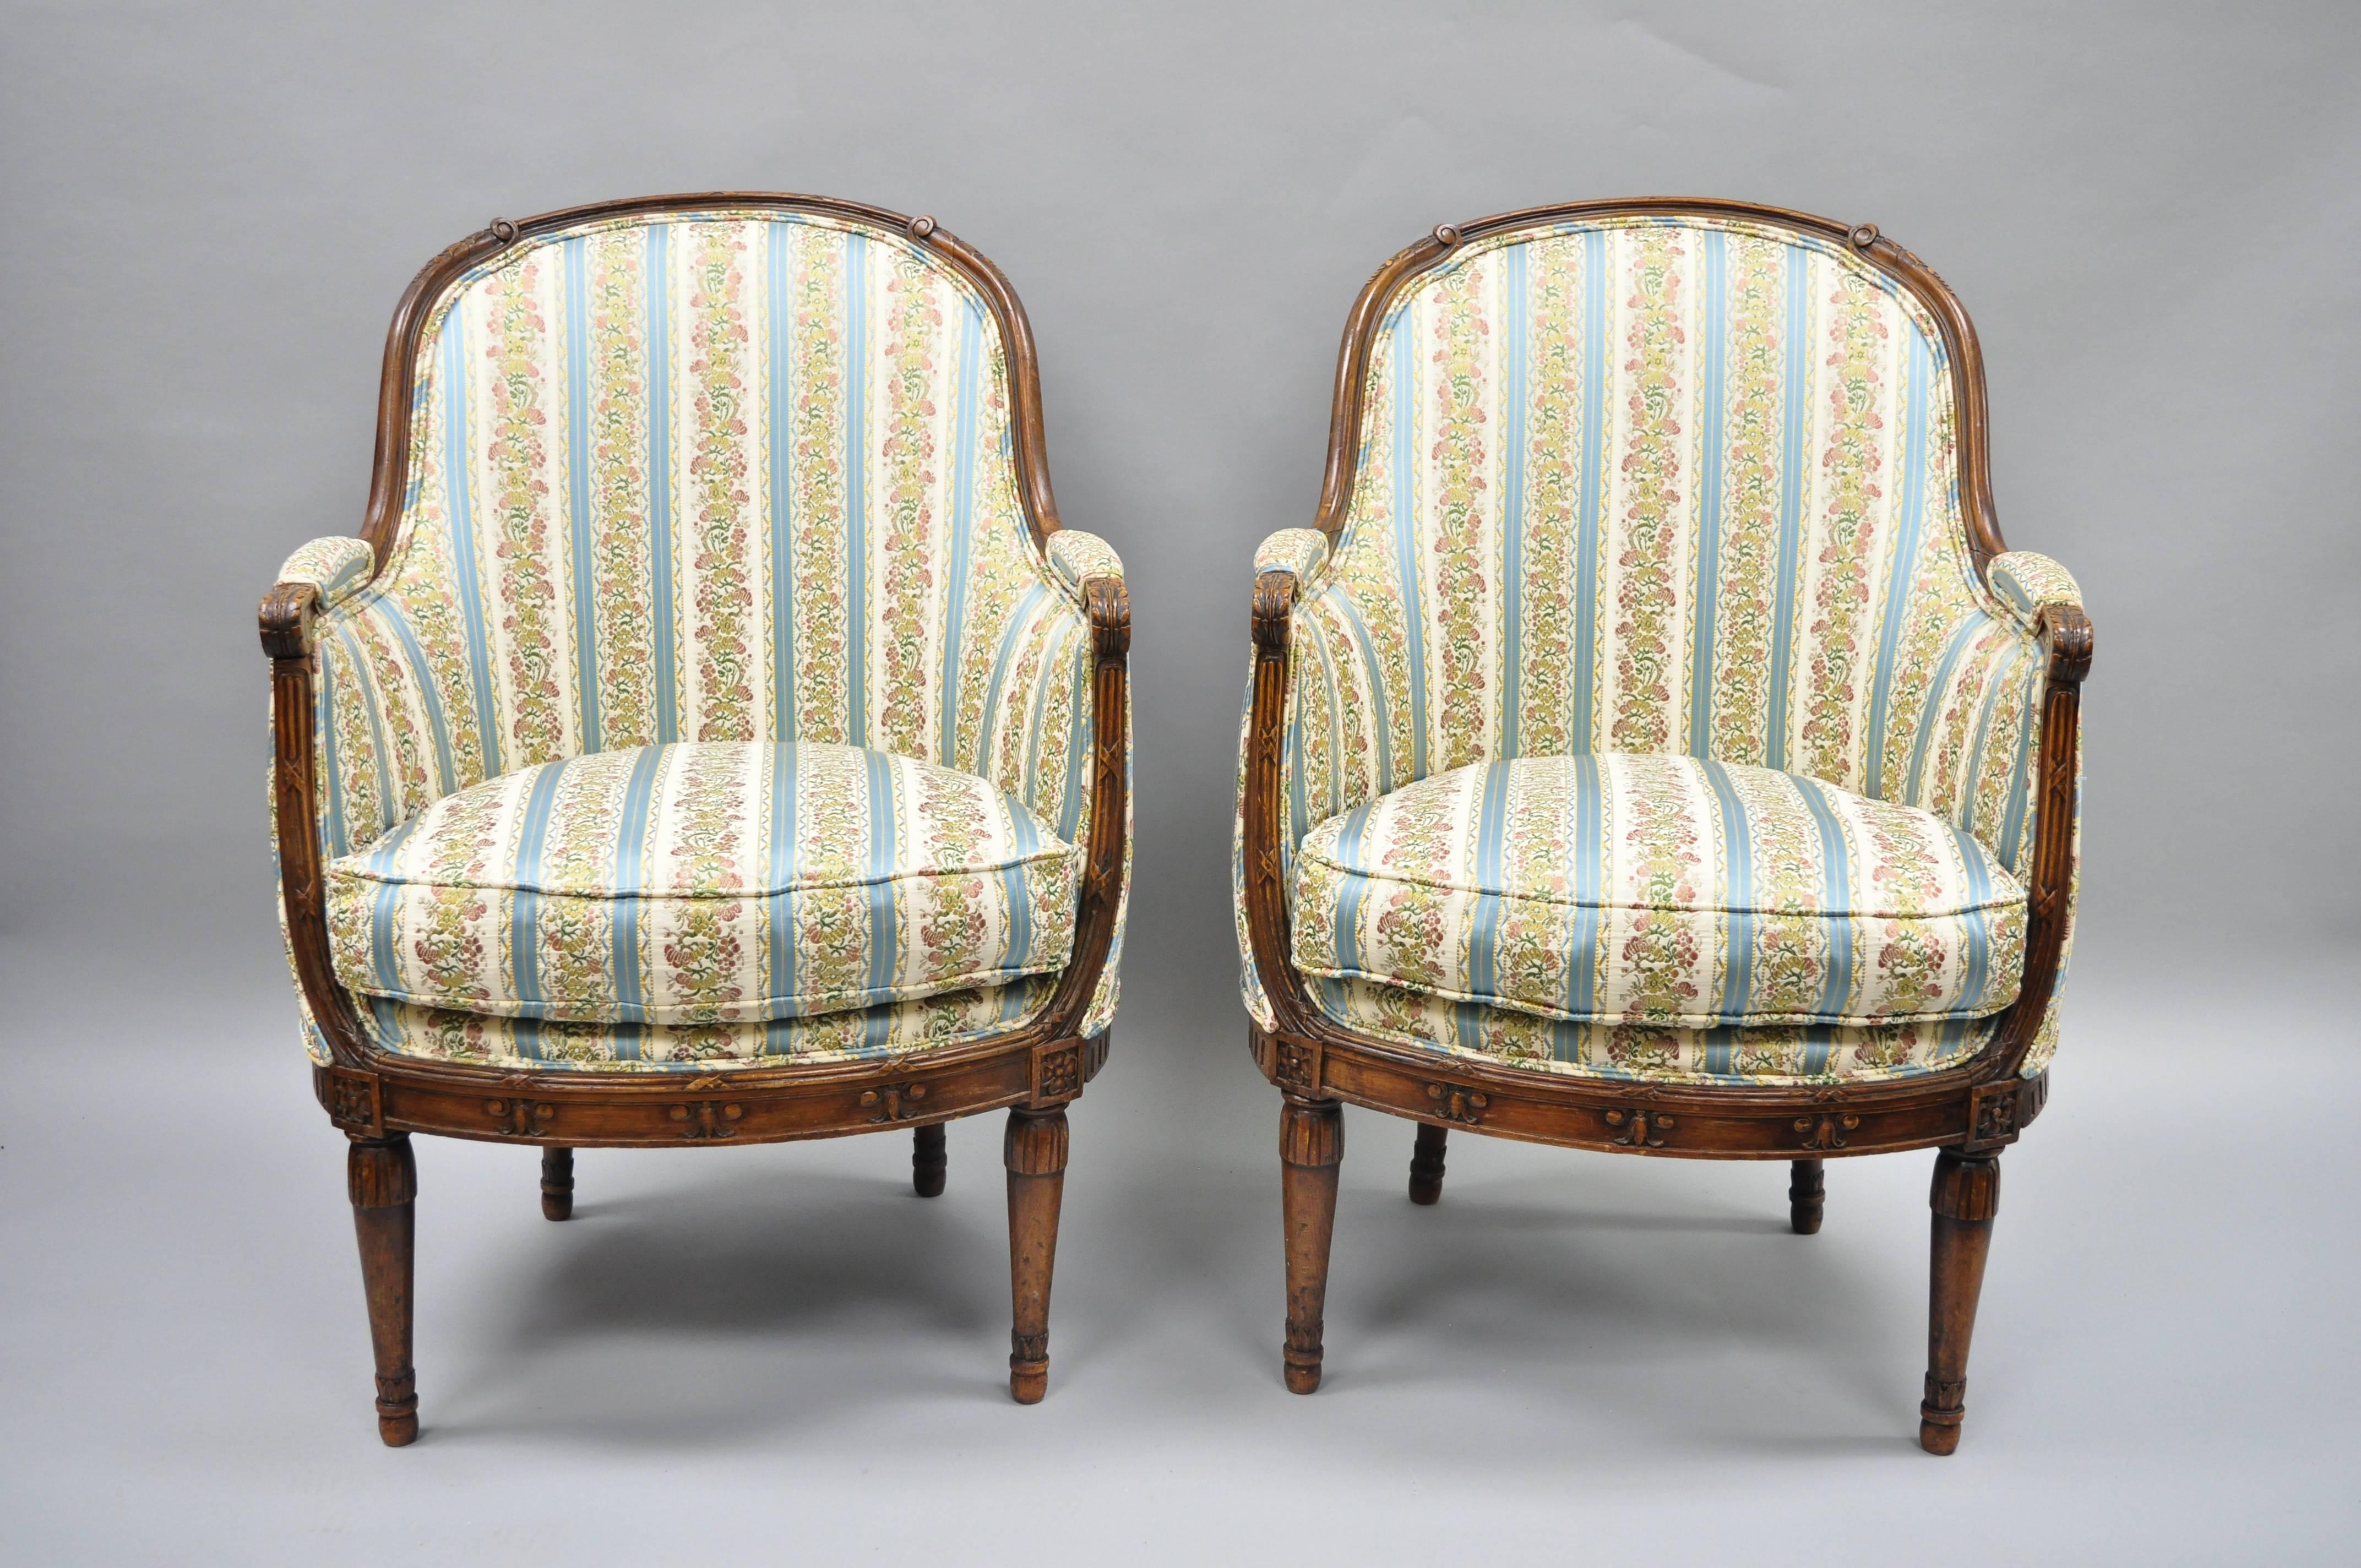 Pair of French Louis XVI Directoire style walnut bergere armchairs. Item features finely carved walnut frames, bell flower and drape details, reeded legs, blue, cream and pink silk upholstery, partial down fill cushions, upholstered armrests, and